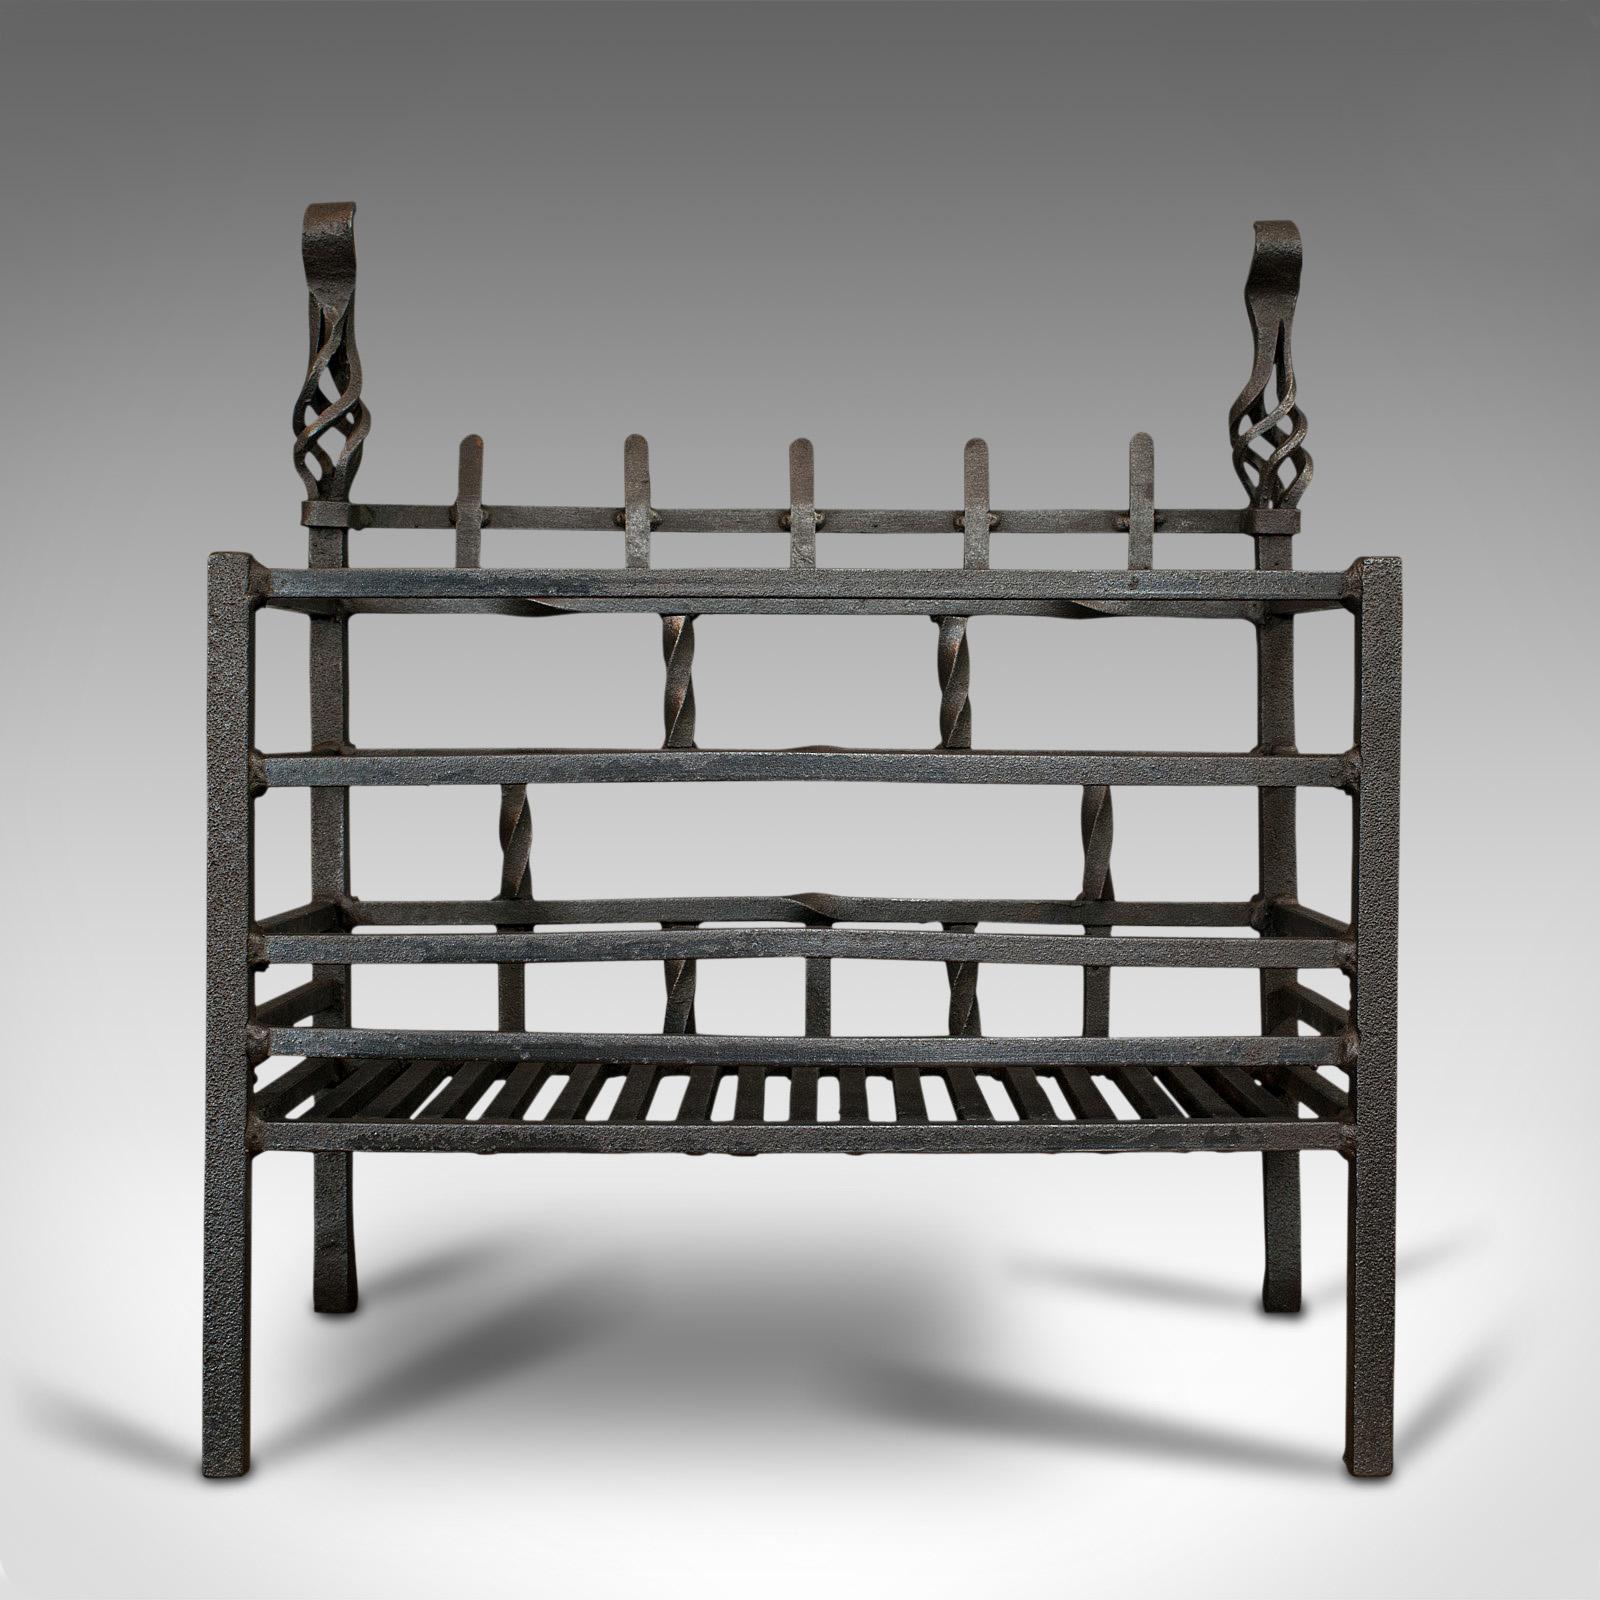 This is an antique fire basket. An English, cast iron fireside grate dating to the late Victorian period, circa 1900.

Practical grate with fine details
Displays a desirable aged patina
Cast iron with good, consistent graphite finish

Basket